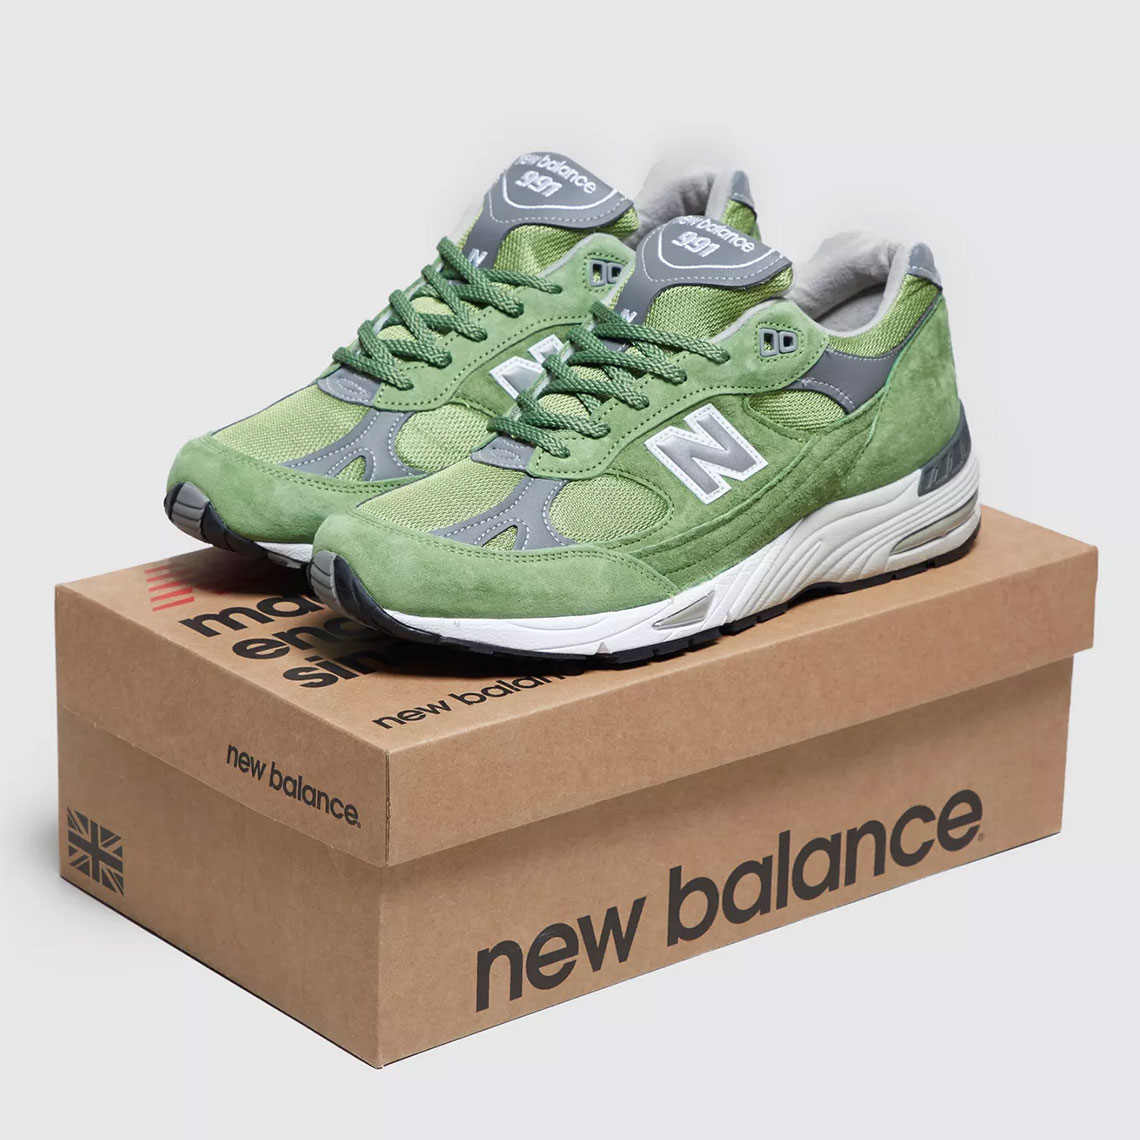 New Balance 991 Spring Green Available 3